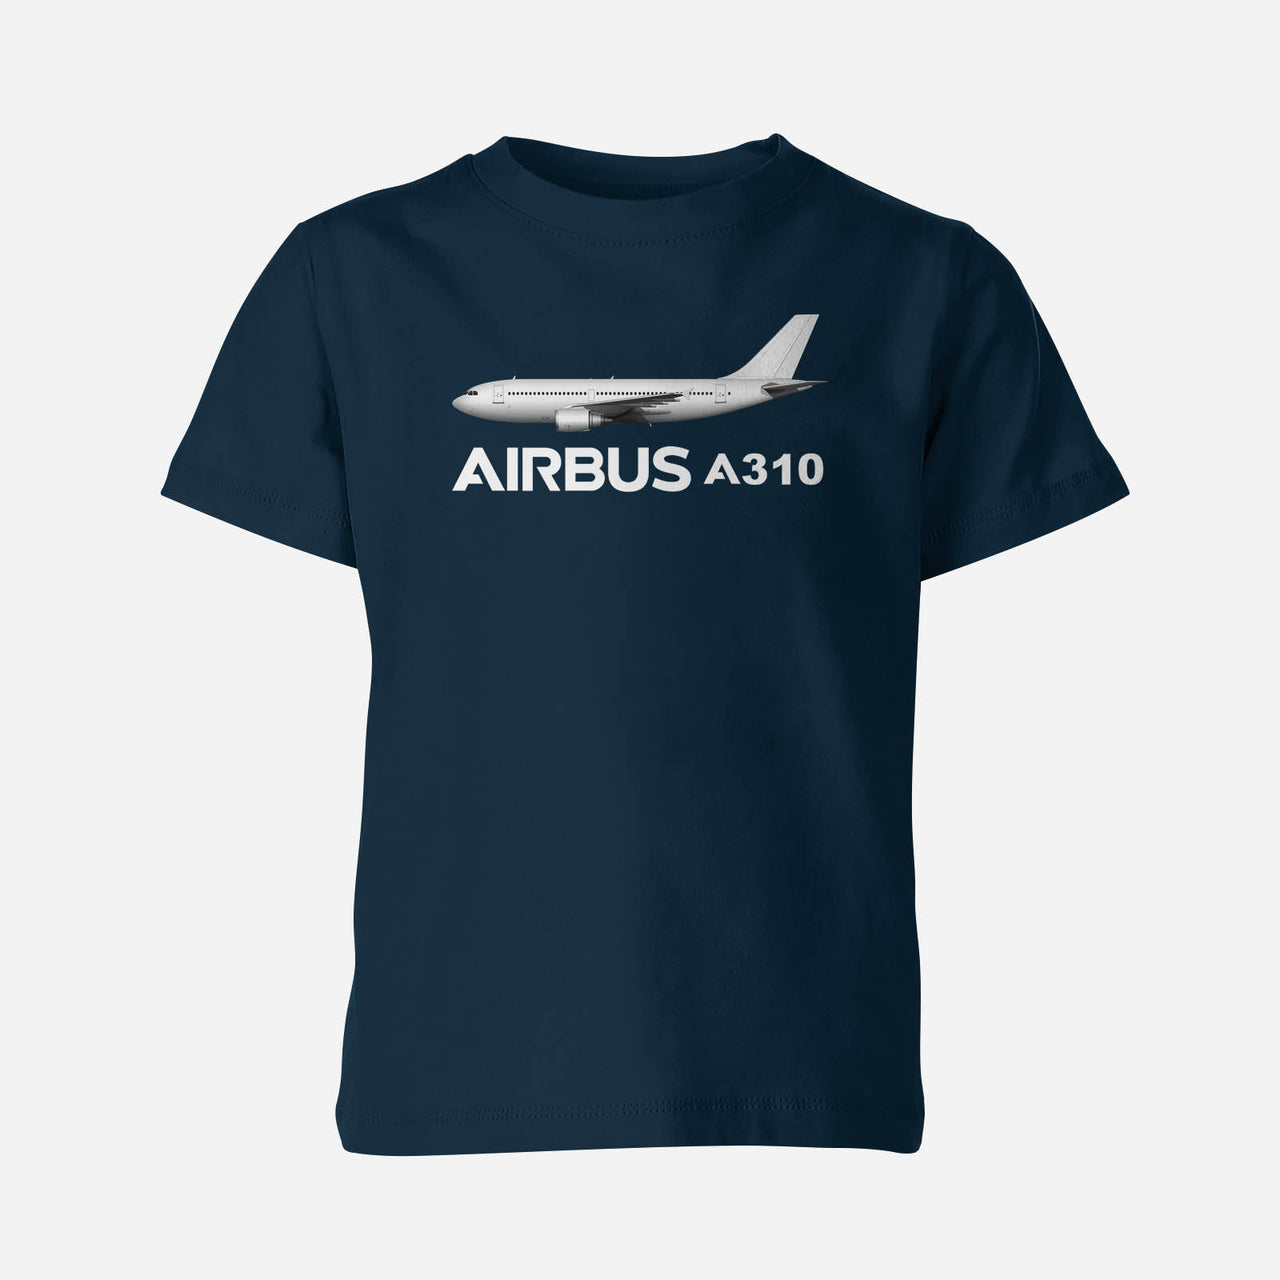 The Airbus A310 Designed Children T-Shirts